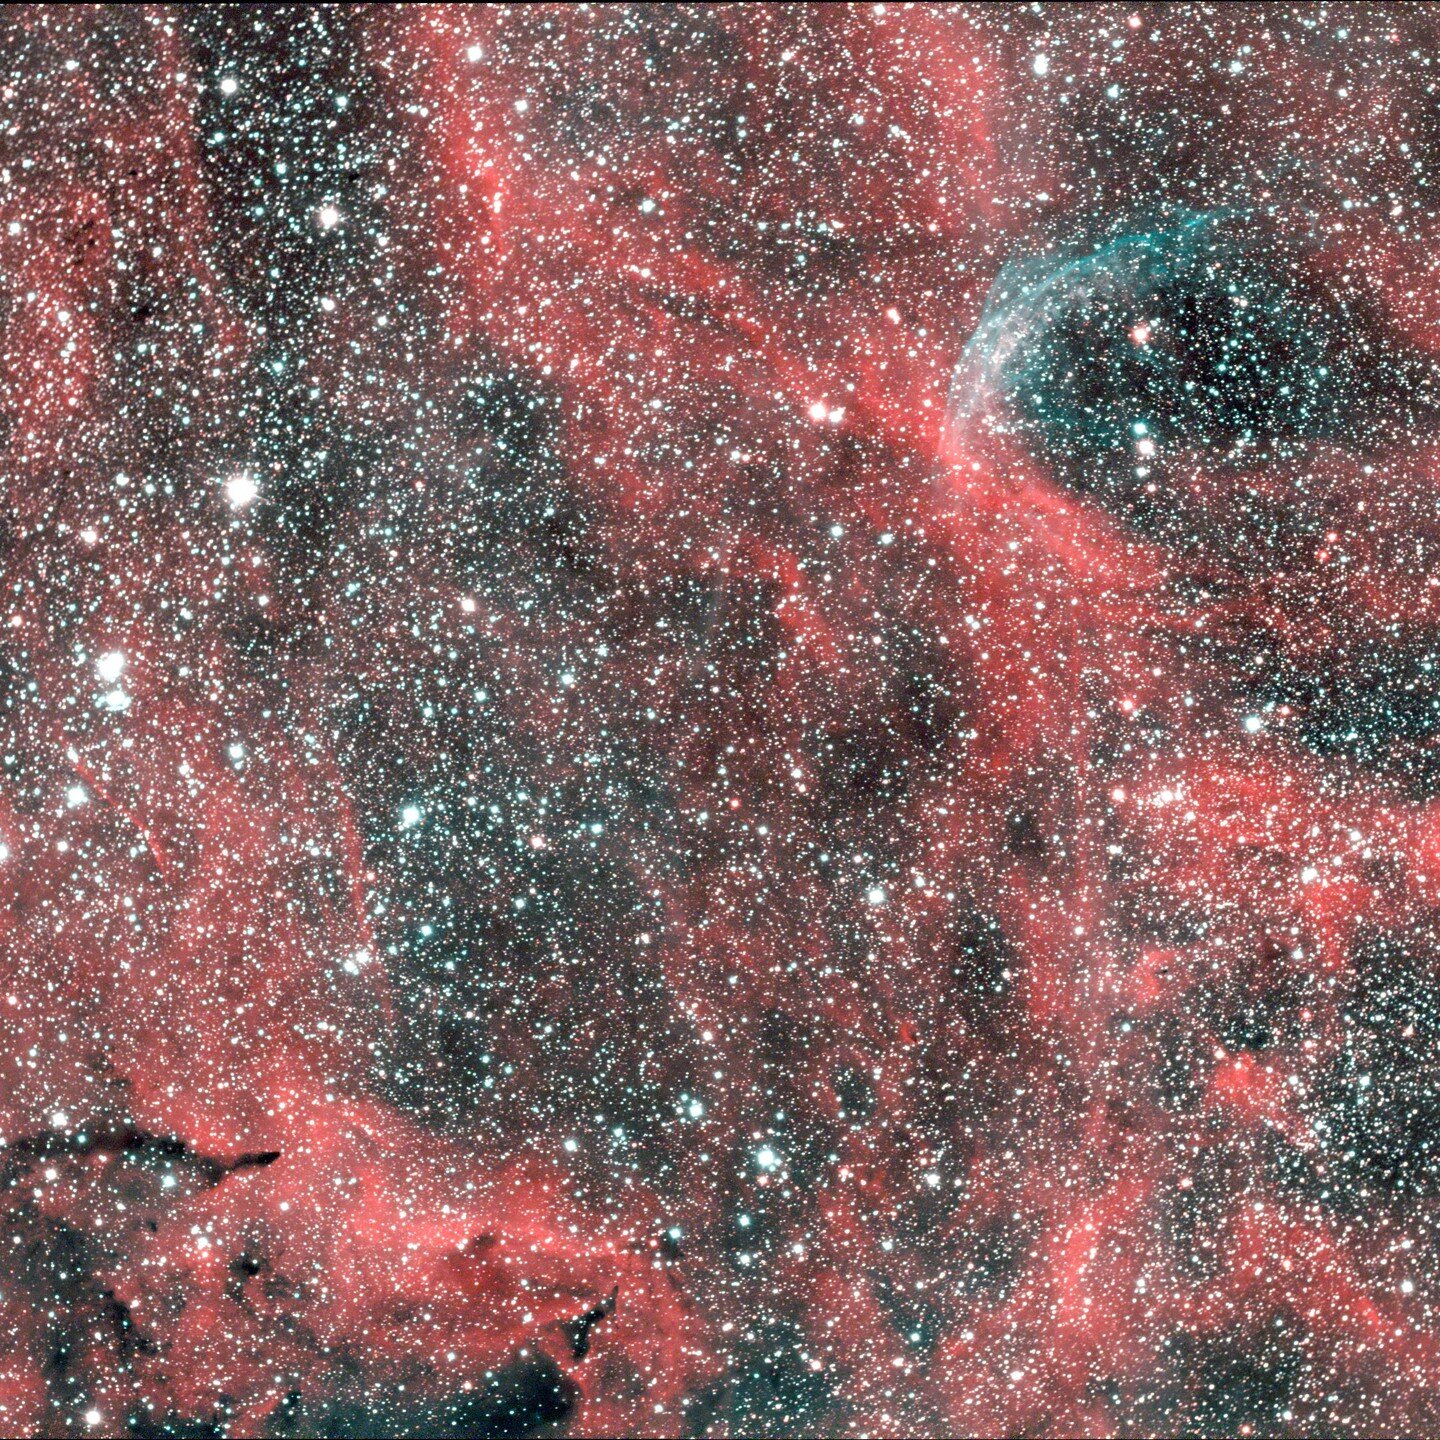 Busy nebulous region near Cygnus - NGC 6883 and WR 134 - 29 five min. exposures (2 hrs. 25 min. total integration), RASA 8, ASI 2600 MC Pro, IDAS NBZ Nebula Booster UHS, ASI Air Plus, taken during the 2023 Oregon Star Party. #oregonstarparty #zwo #as